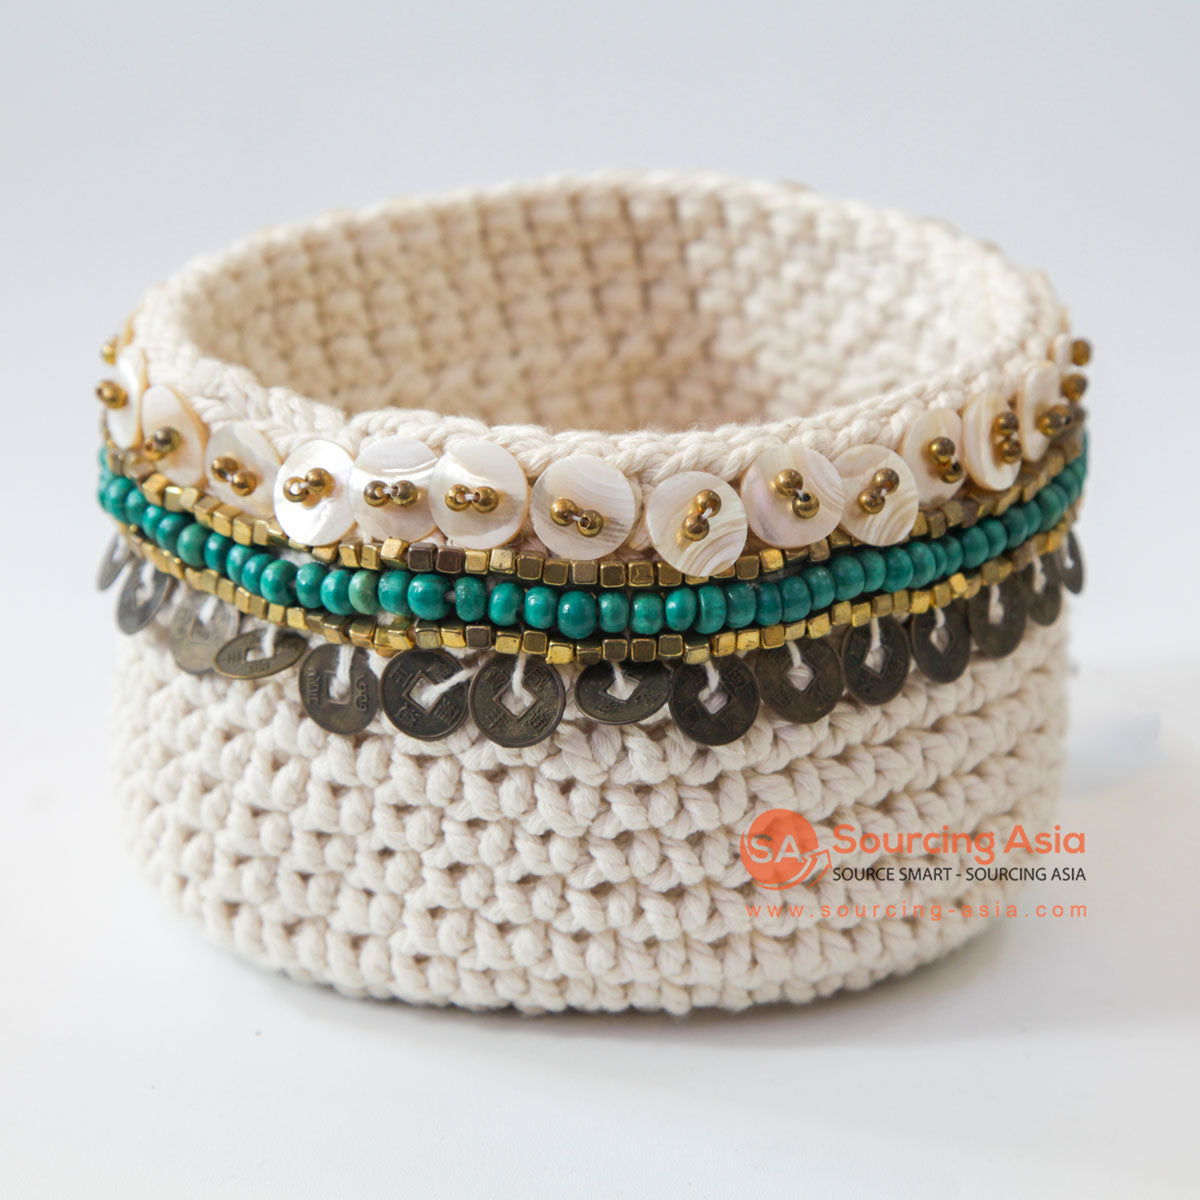 DHL121 WHITE MACRAME AND MIXED COLOR BEADS SMALL BASKET